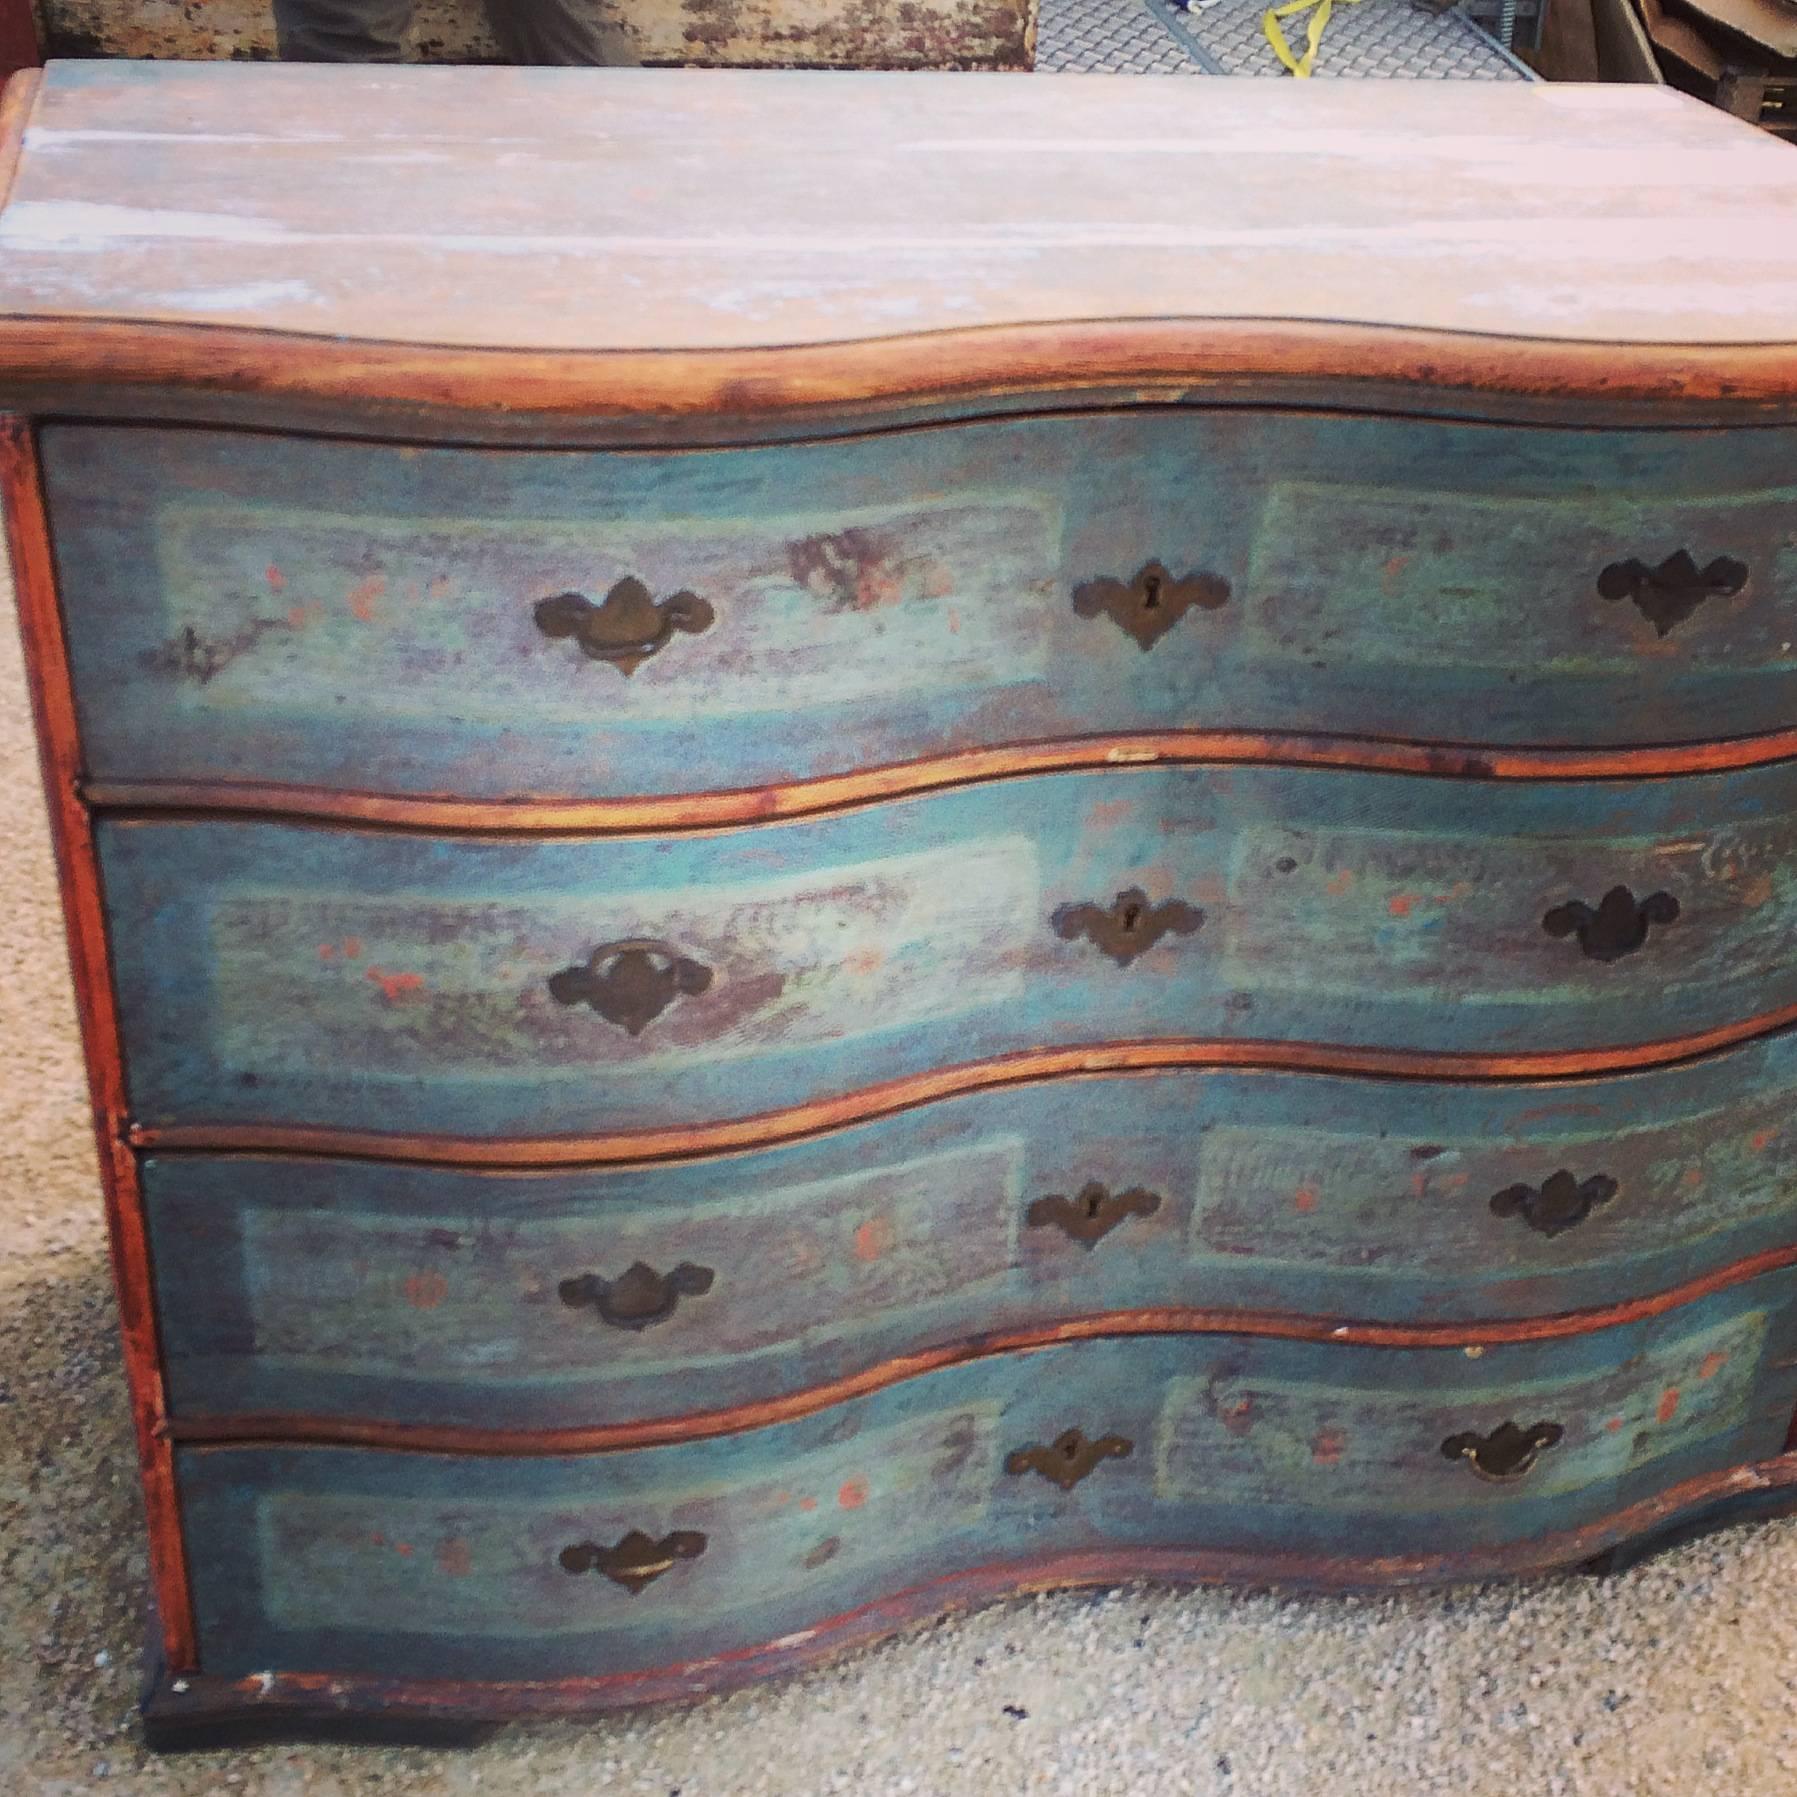 Lovely original patina on this four-drawer Swedish Painted serpentine commode.
